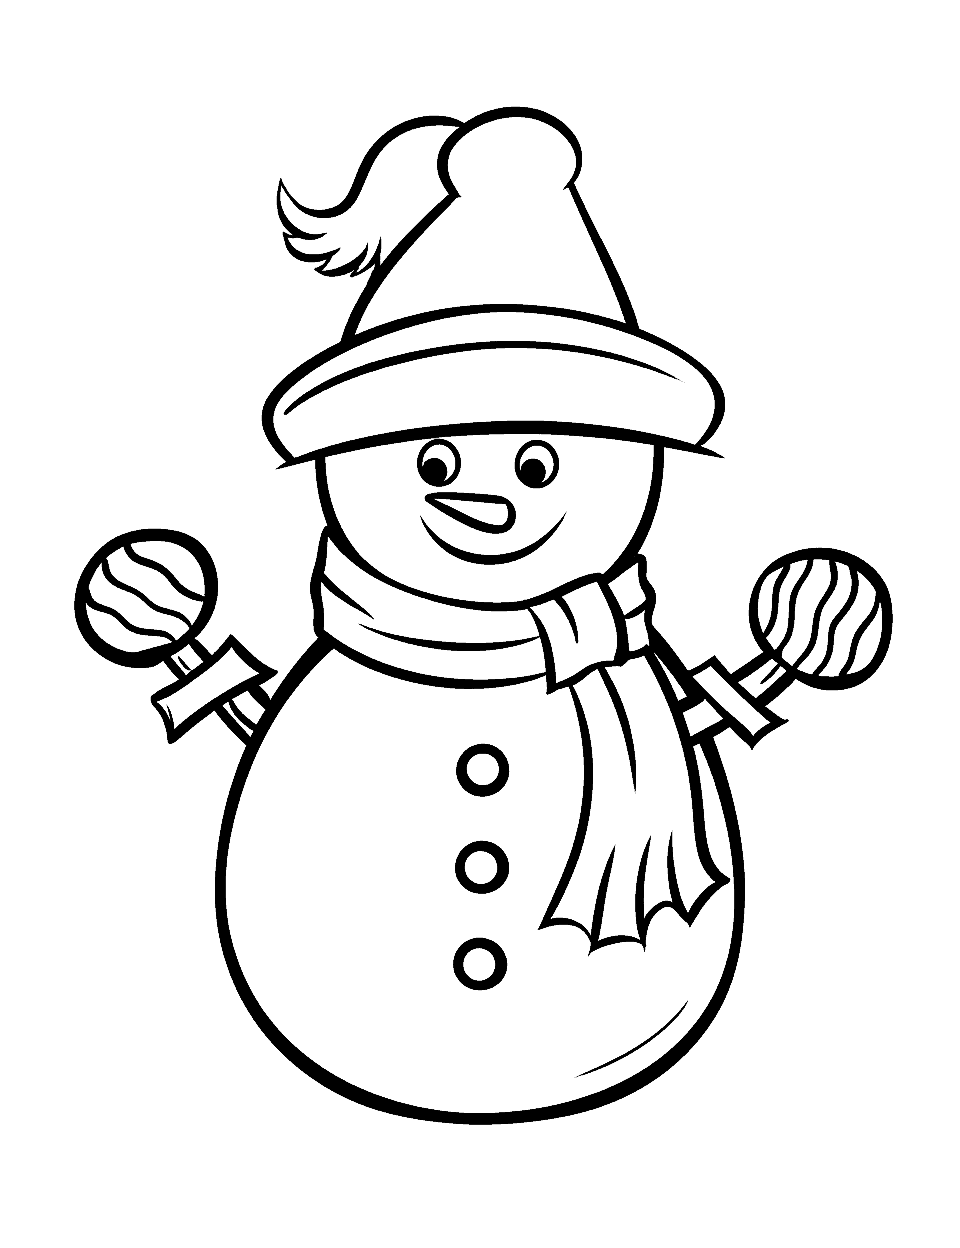 Silly Snowman Christmas Coloring Page - A silly snowman with a carrot nose and wearing a top hat.